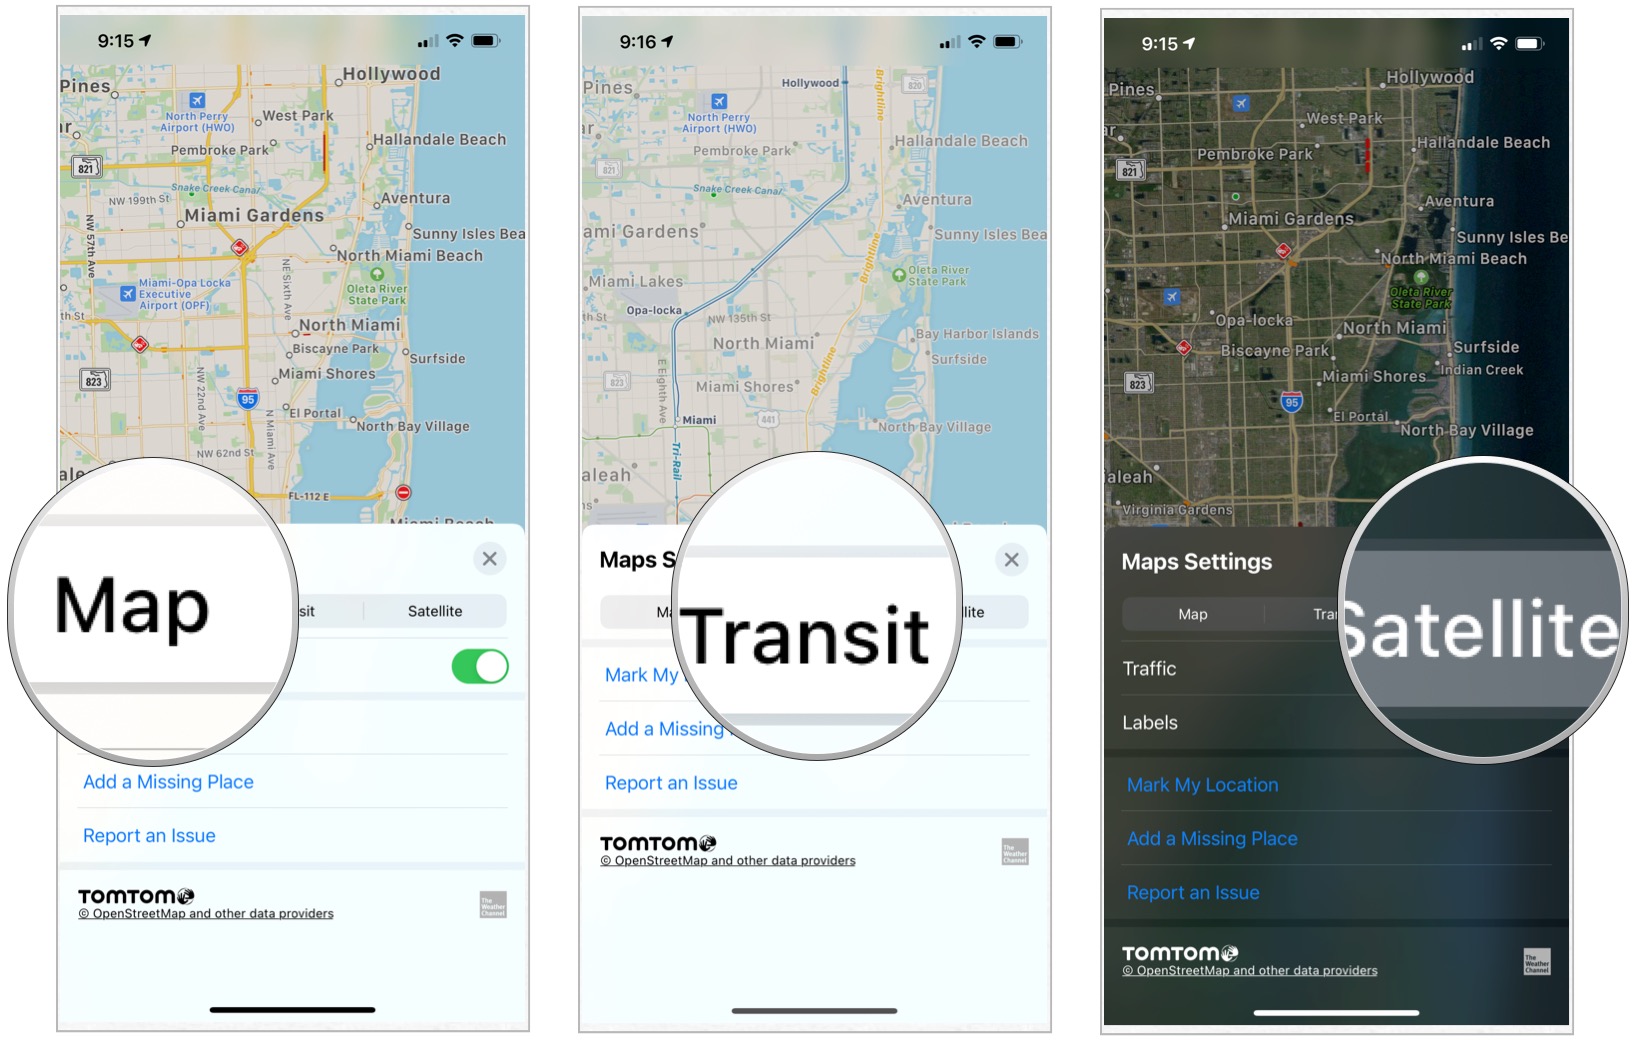 To change the Maps view, choose between Maps, Transit, and Satellite